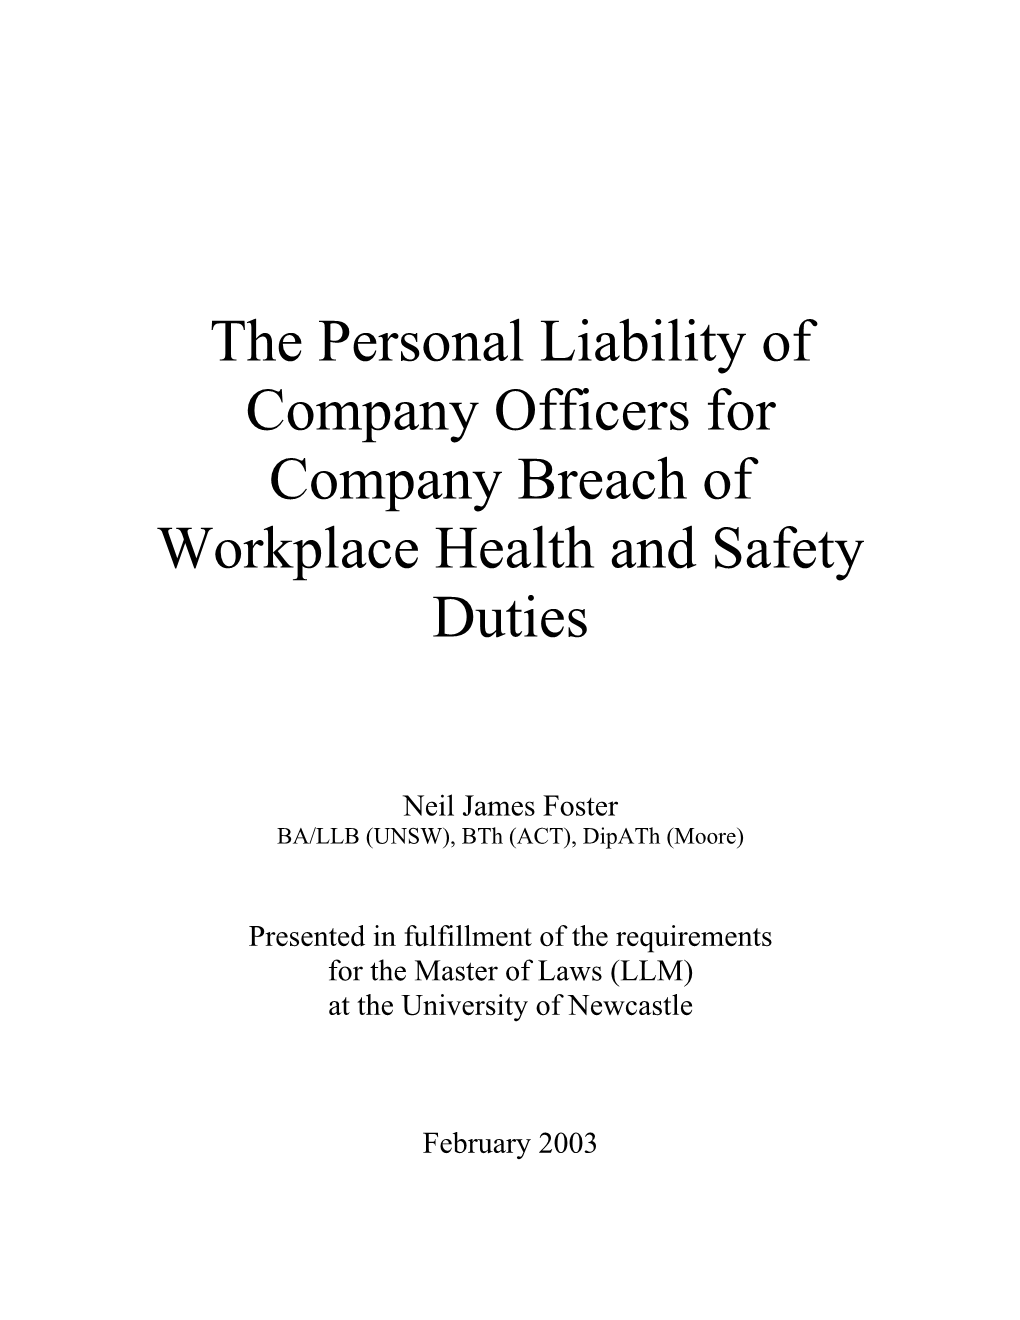 The Personal Liability of Company Officers for Company Breach of Workplace Health and Safety Duties